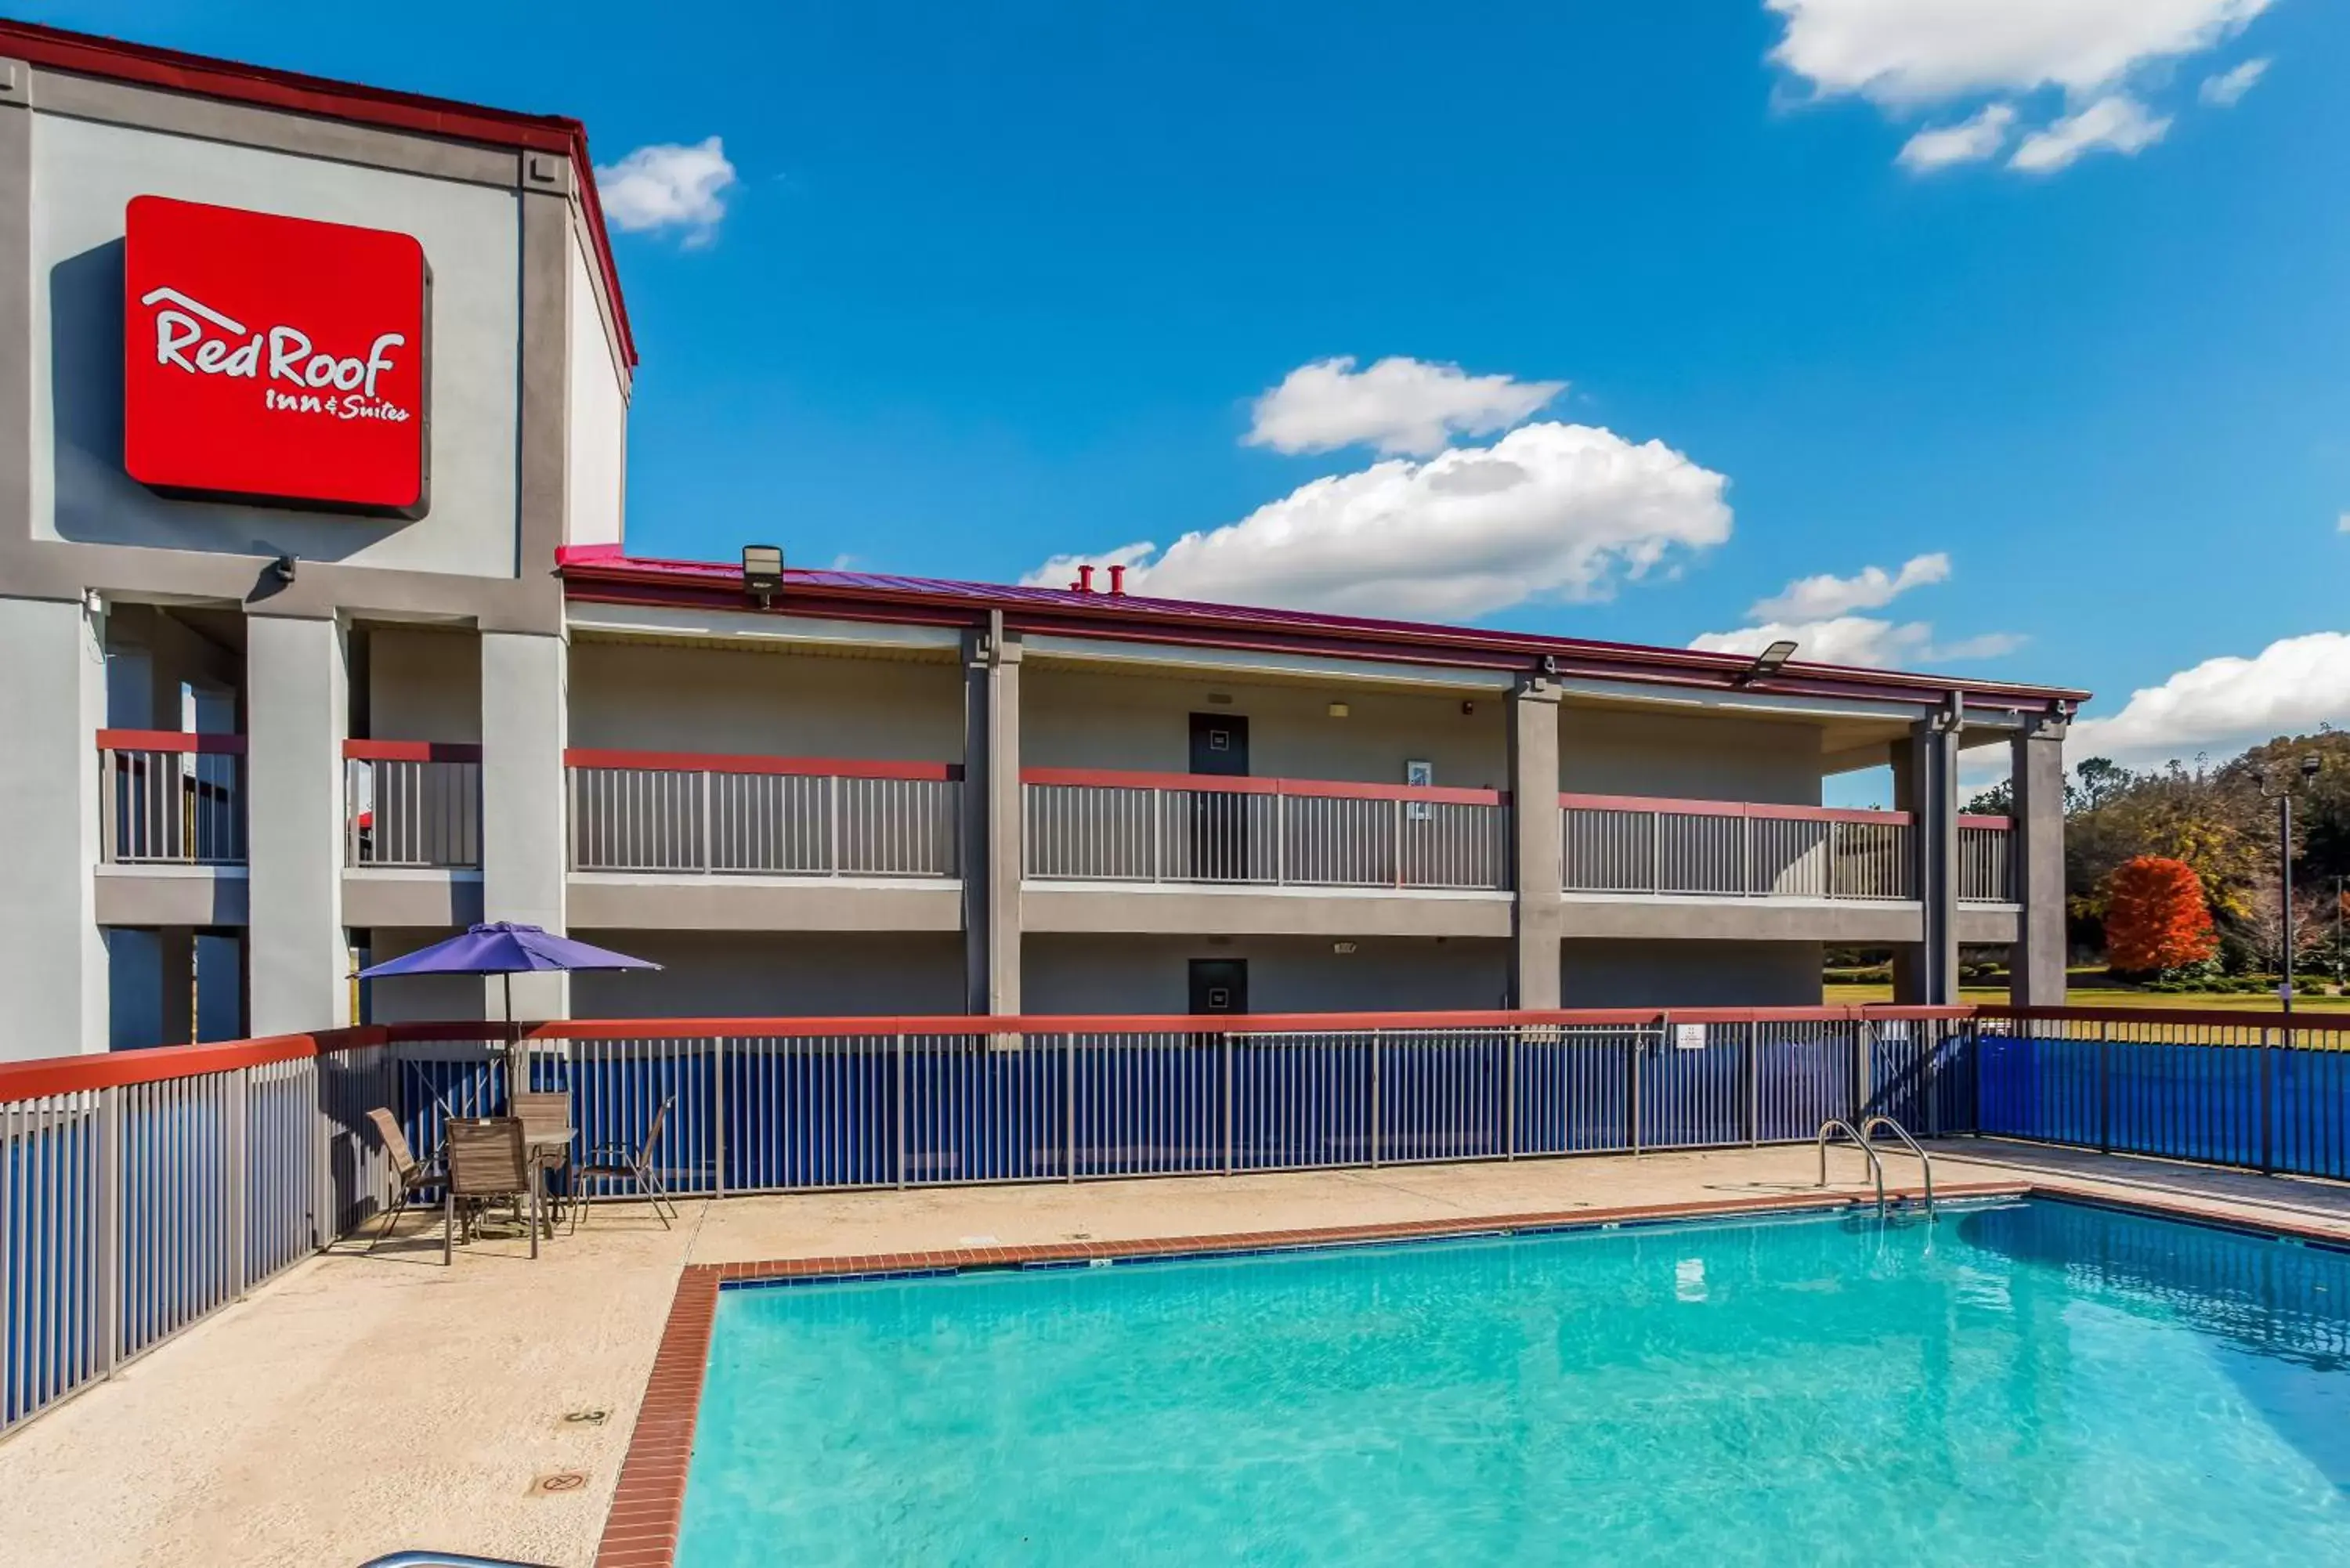 Swimming Pool in Red Roof Inn & Suites Athens, AL